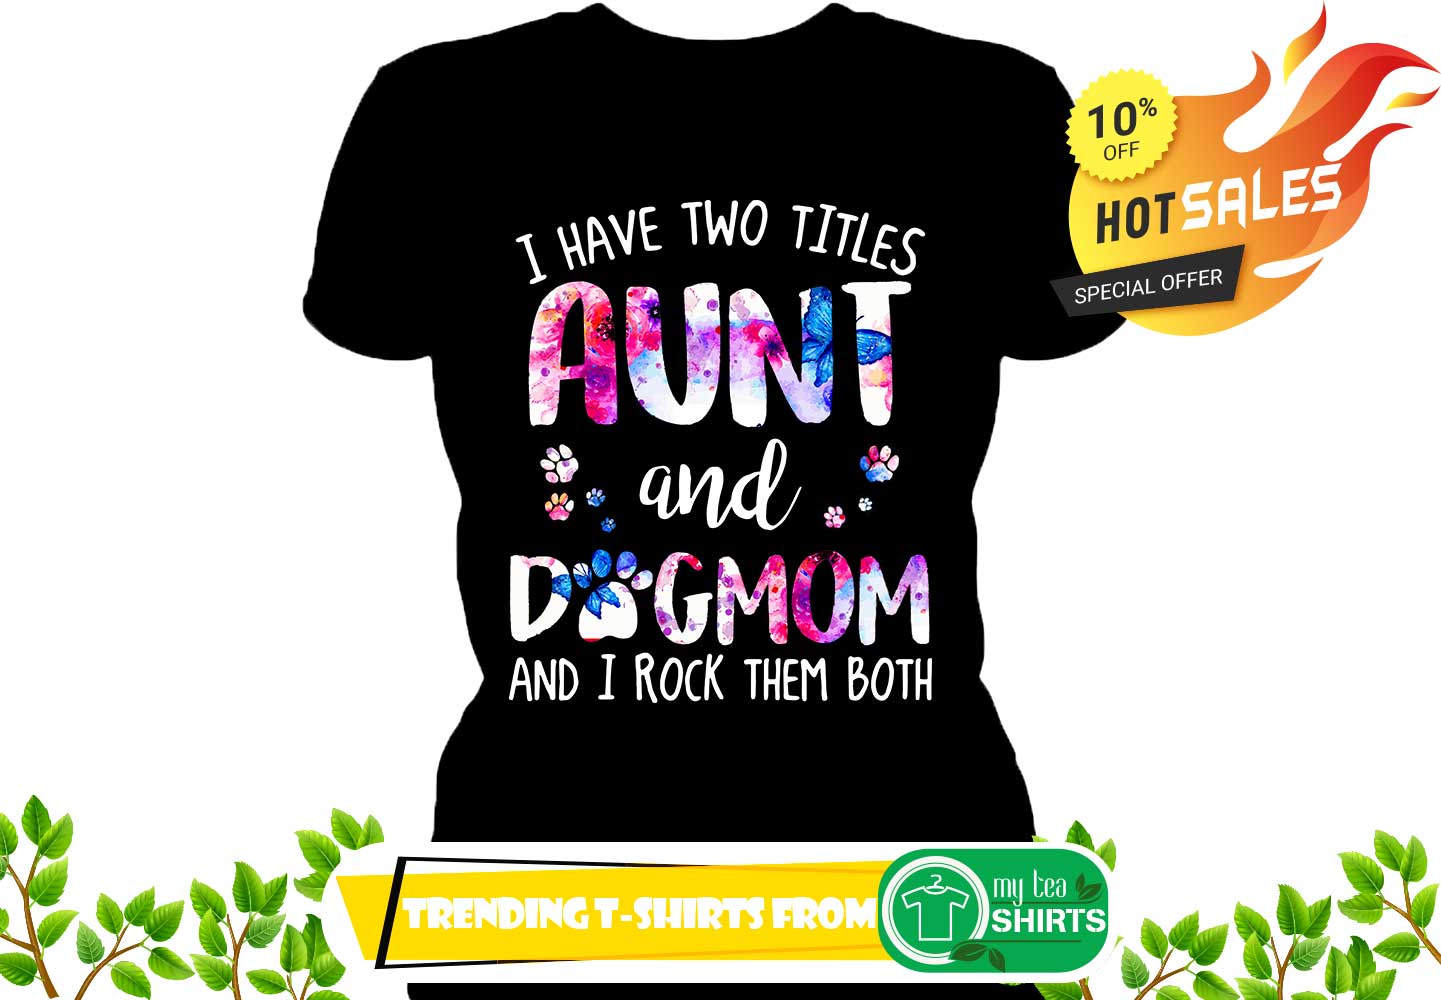 I have two titles aunt and dogmom and rock them both shirt